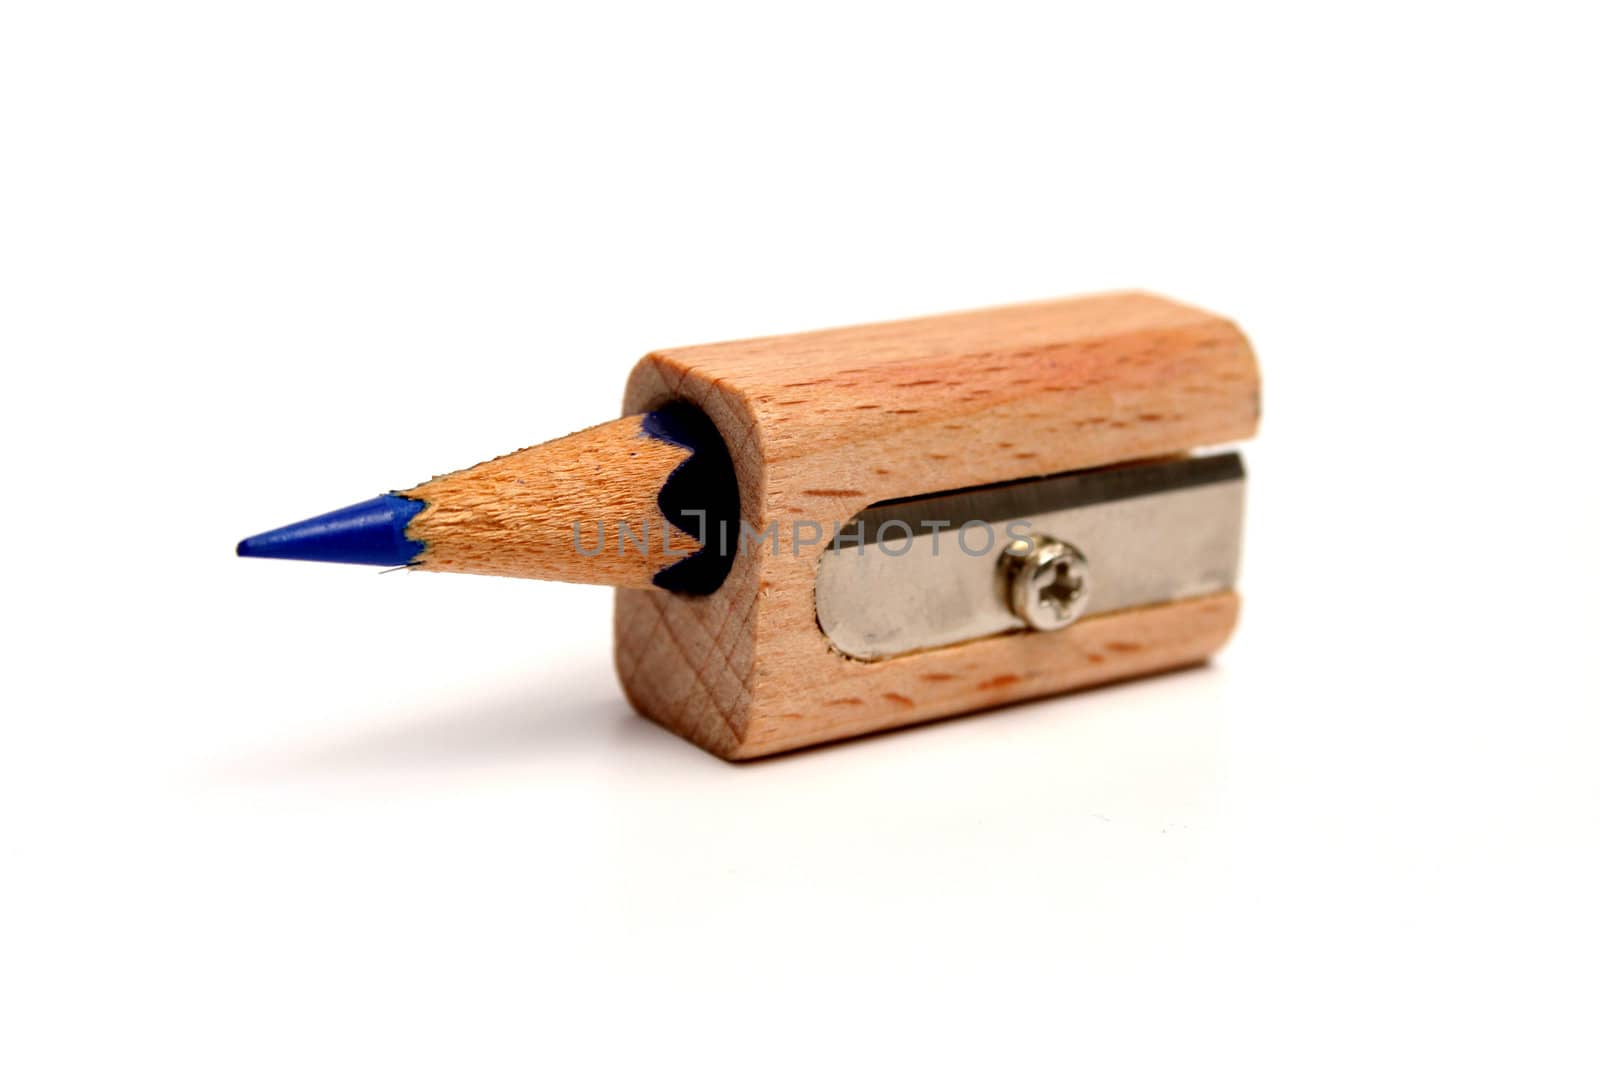 The rests of a pencil inside of a sharpener for pencils by parrus